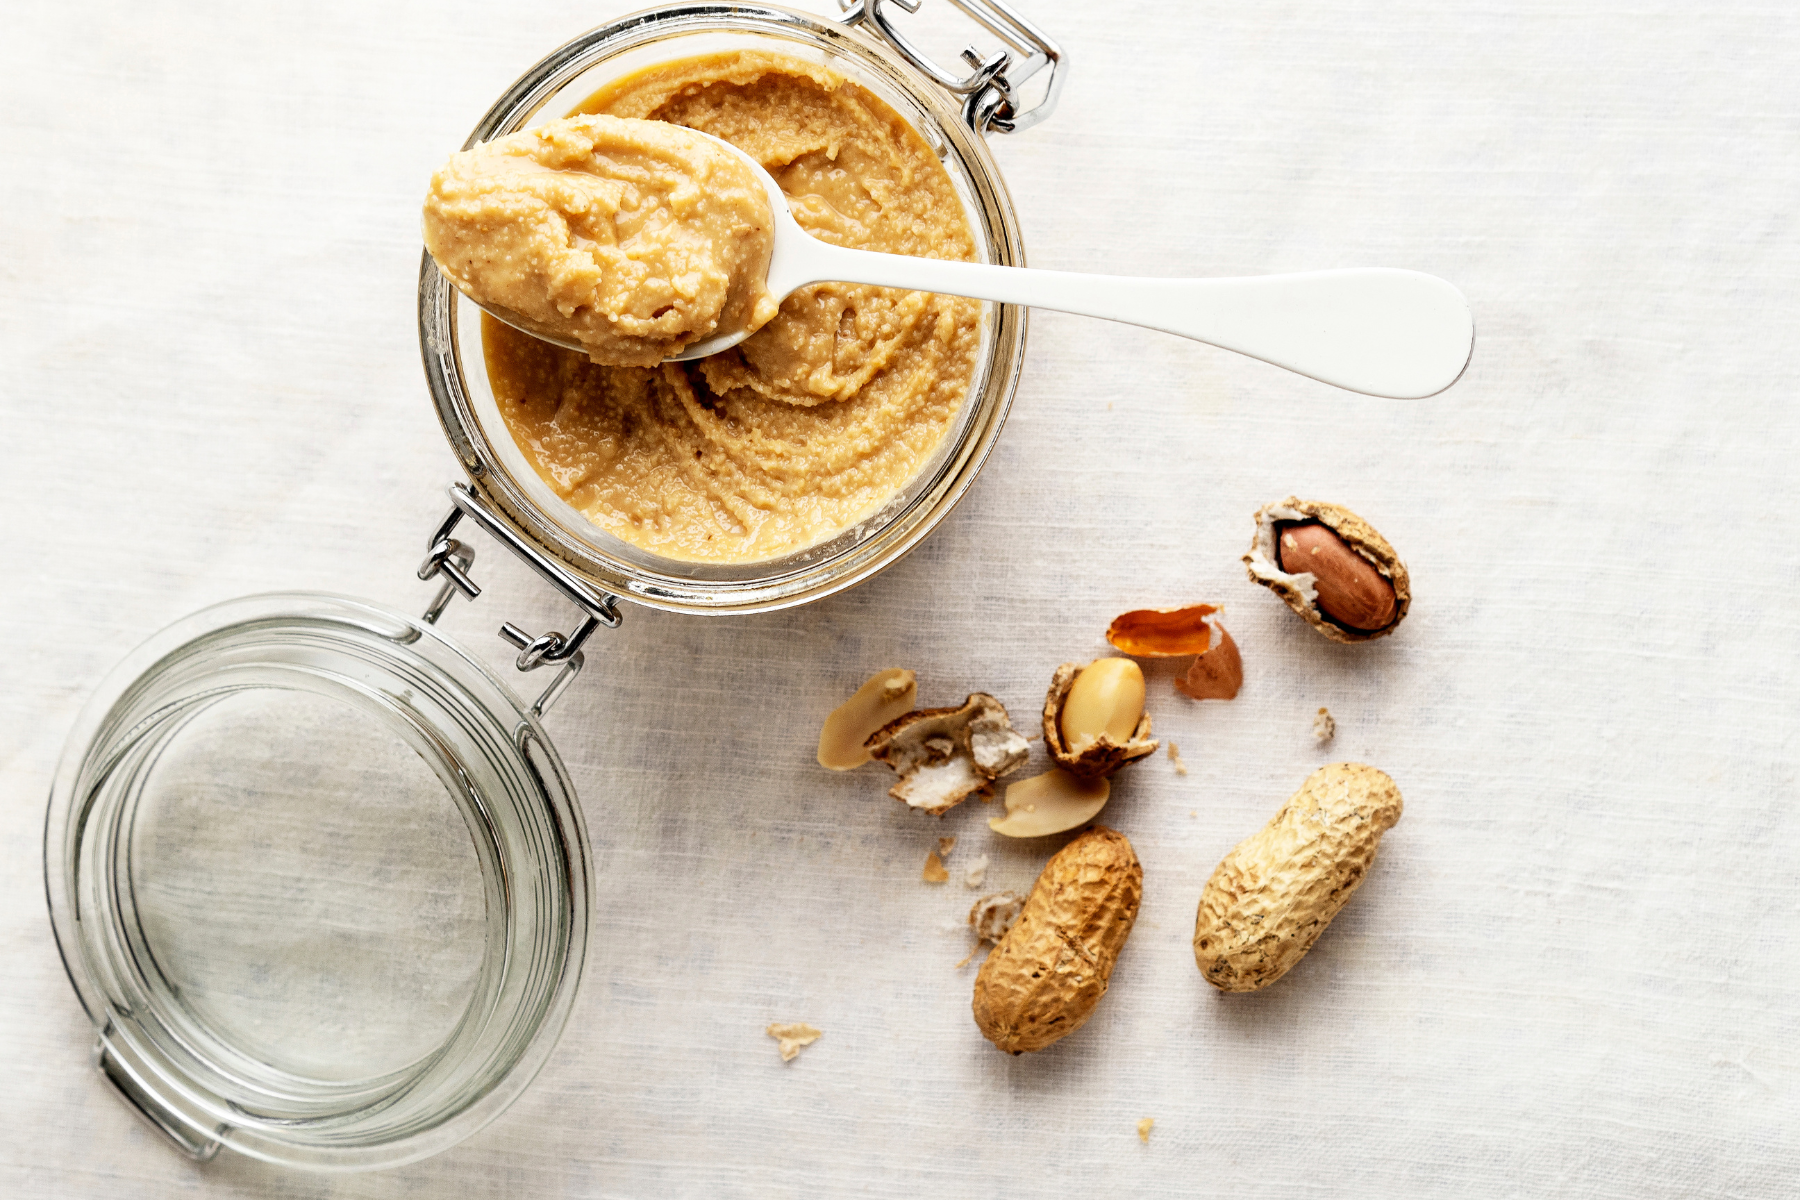 A jar filled with peanut butter and nuts, a healthy combination of flavors and nutrients.